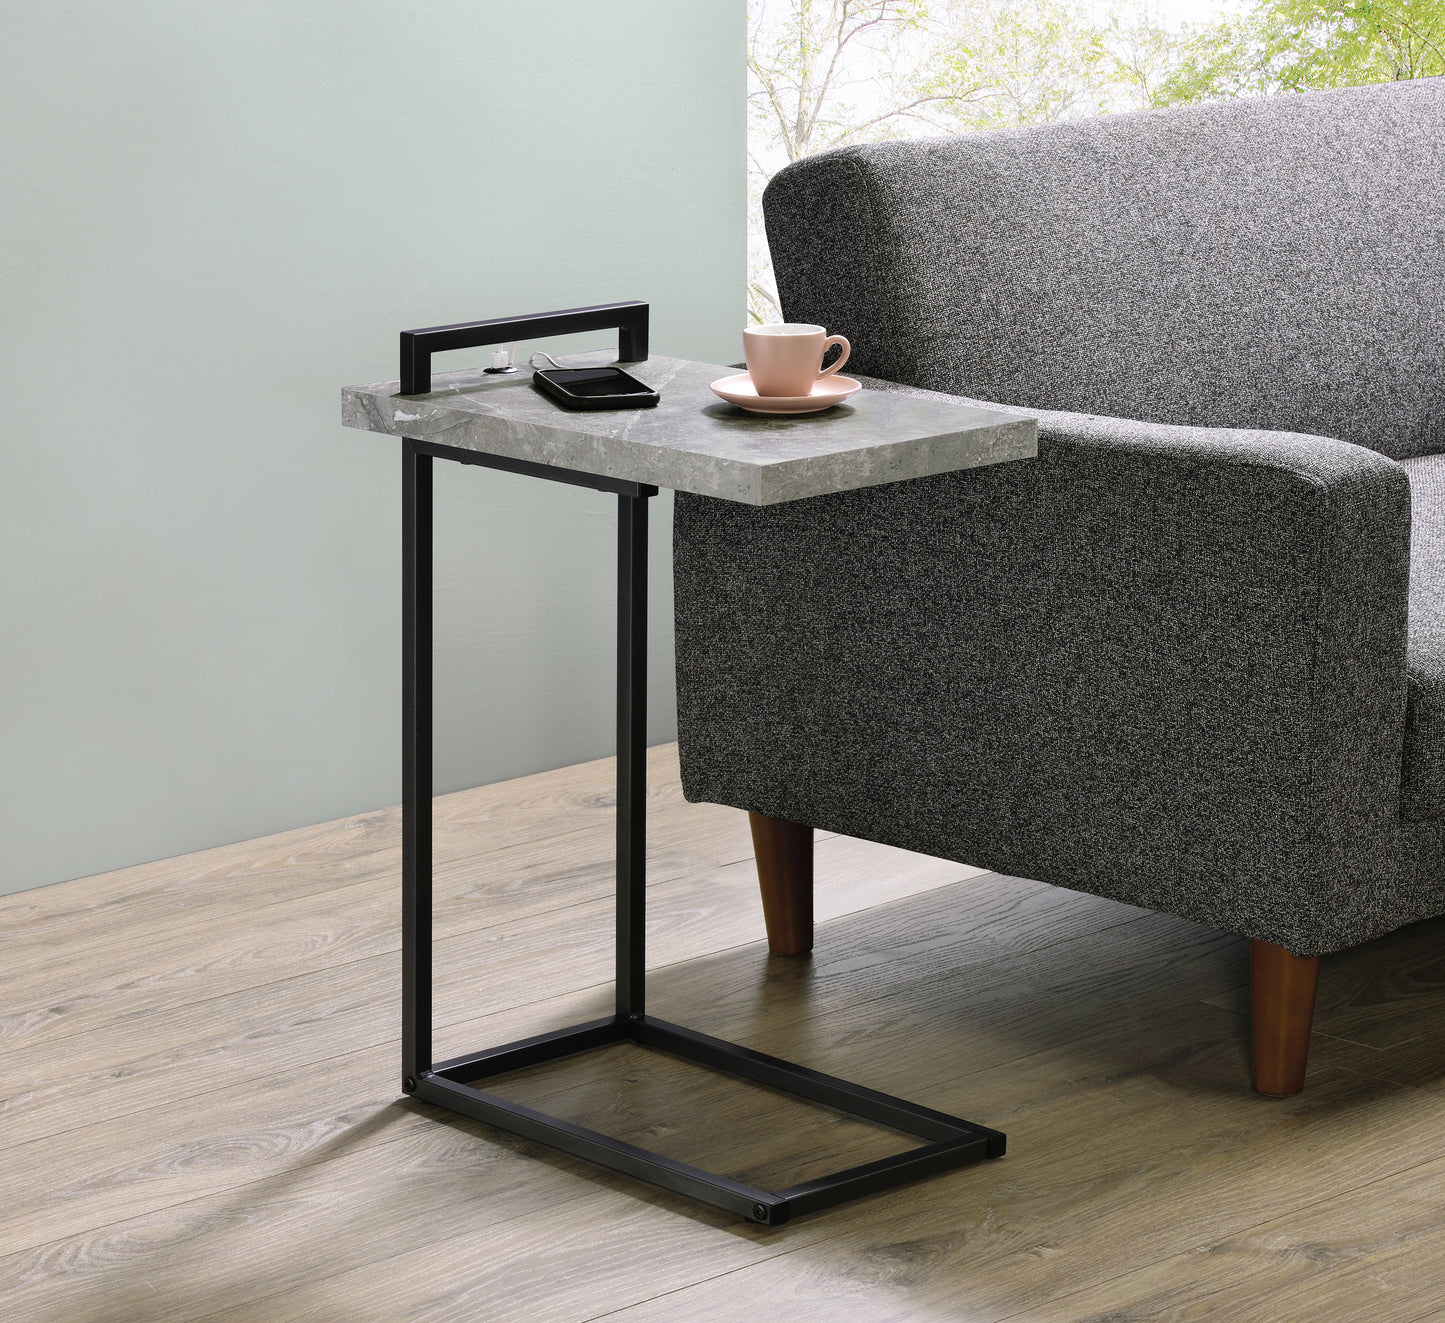 C-shaped Accent Table Cement and Gunmetal